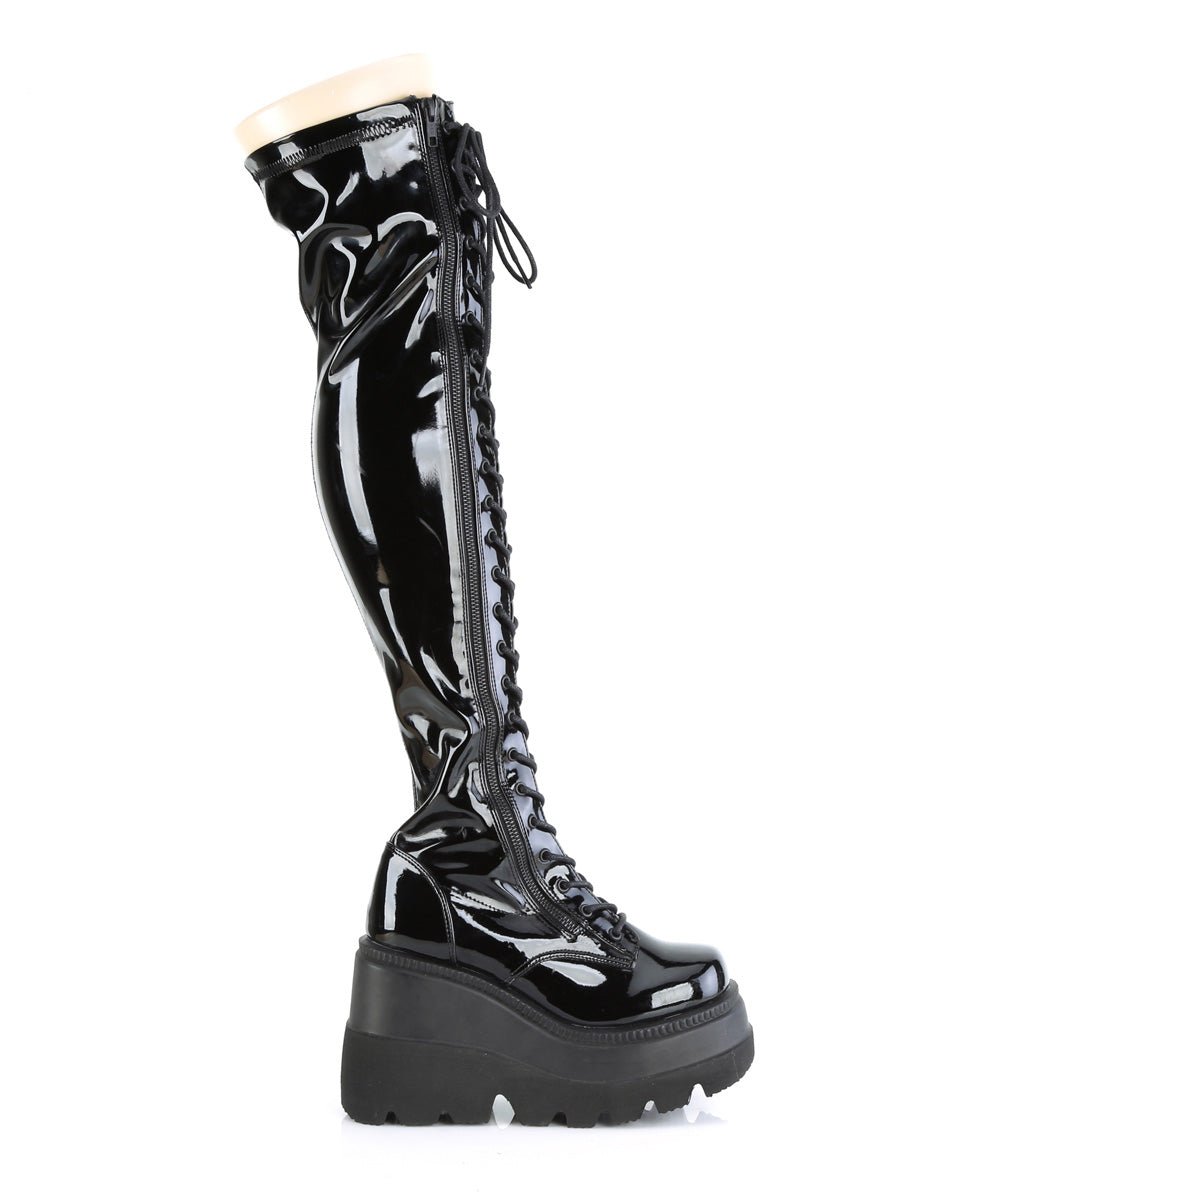 Too Fast | Demonia Shaker 374 | Black Stretch Patent Leather Women&#39;s Over The Knee Boots